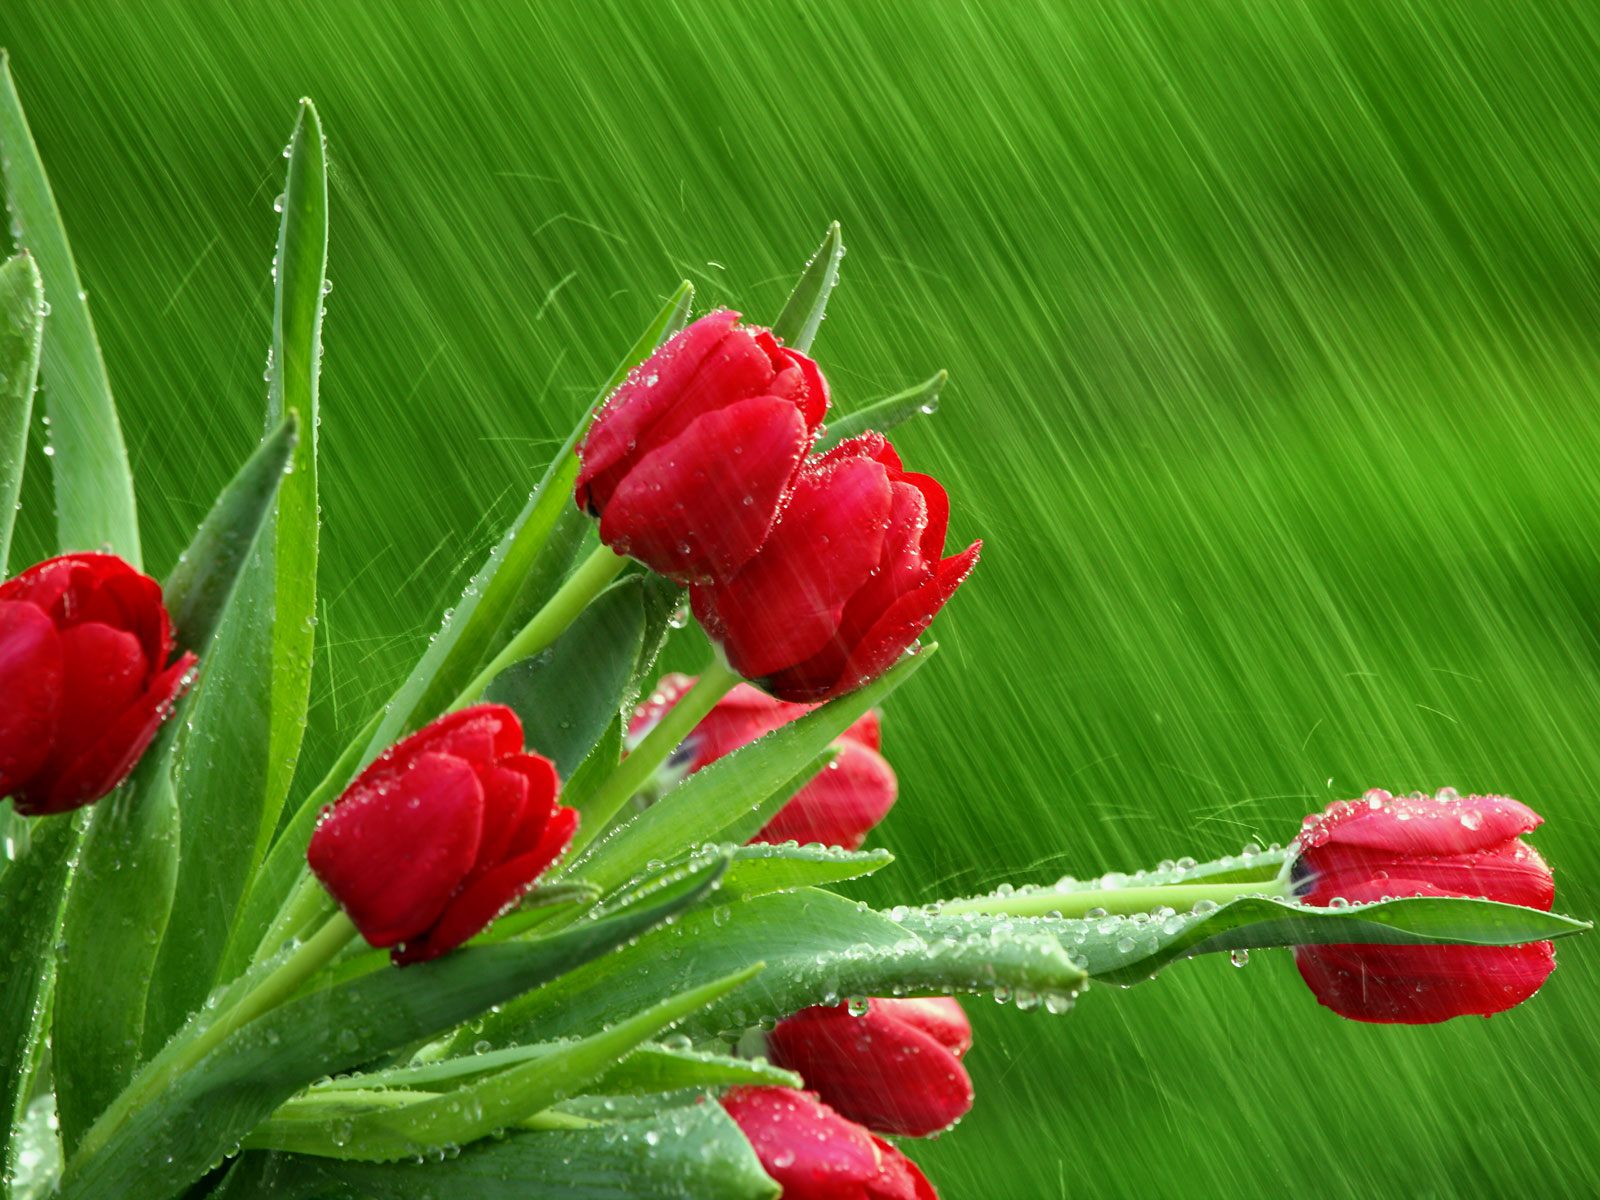 Rain on Flowers Wallpapers HD Wallpapers Pictures Images 1600x1200